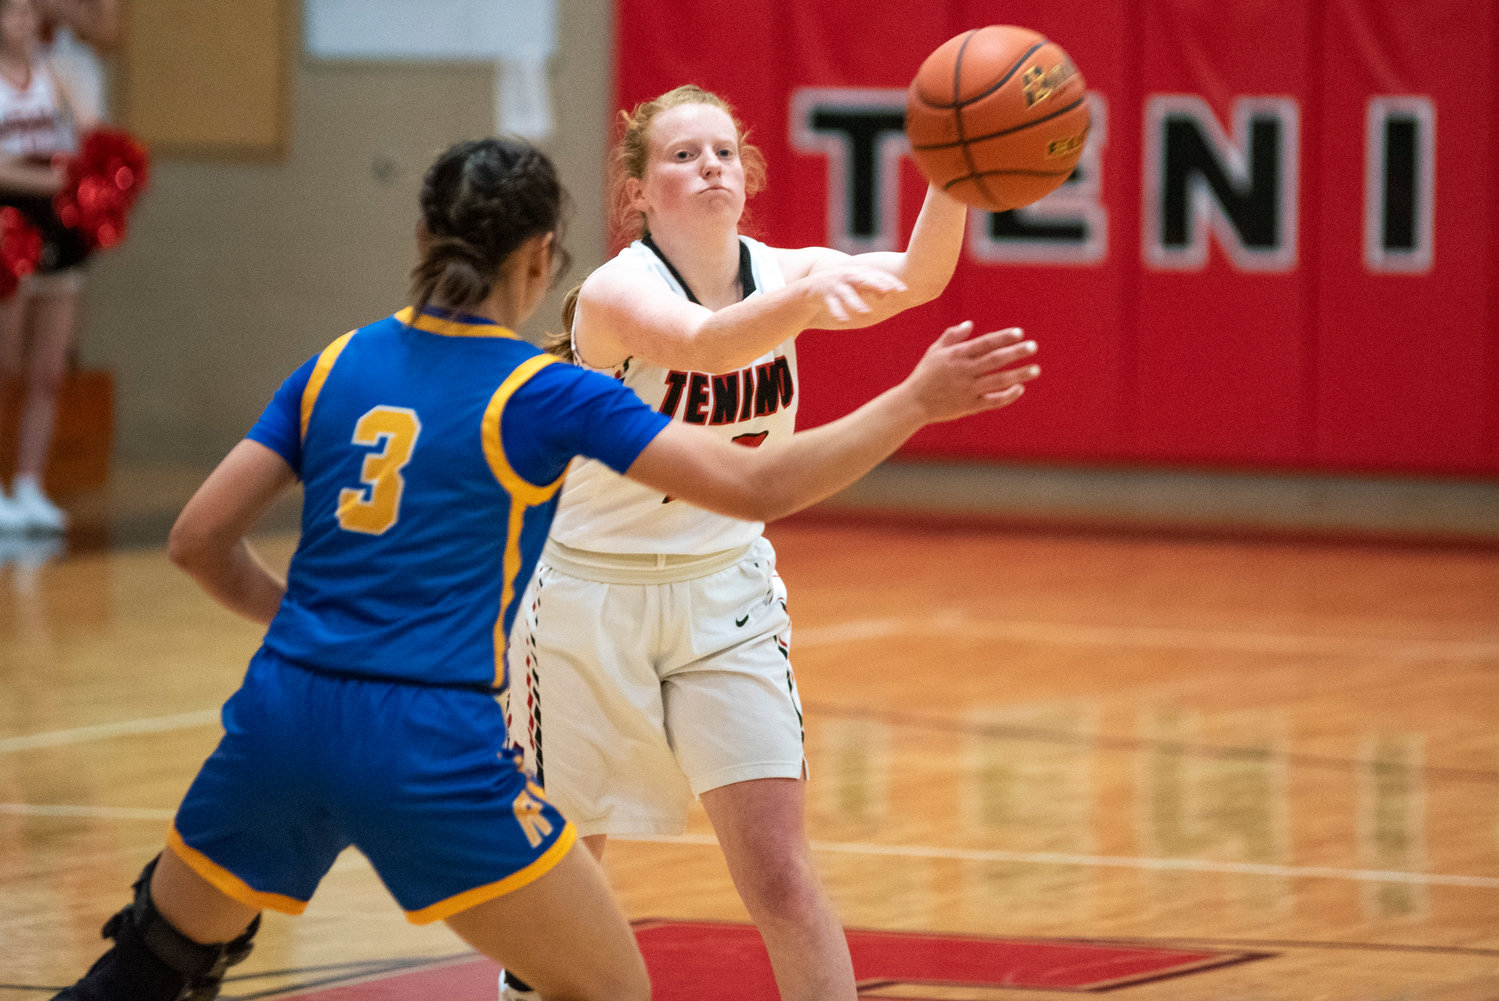 FILE PHOTO -- Tenino's Abby Severse (12) dishes off a pass against Rochester's Sadie Knutson (3) on Dec. 2.